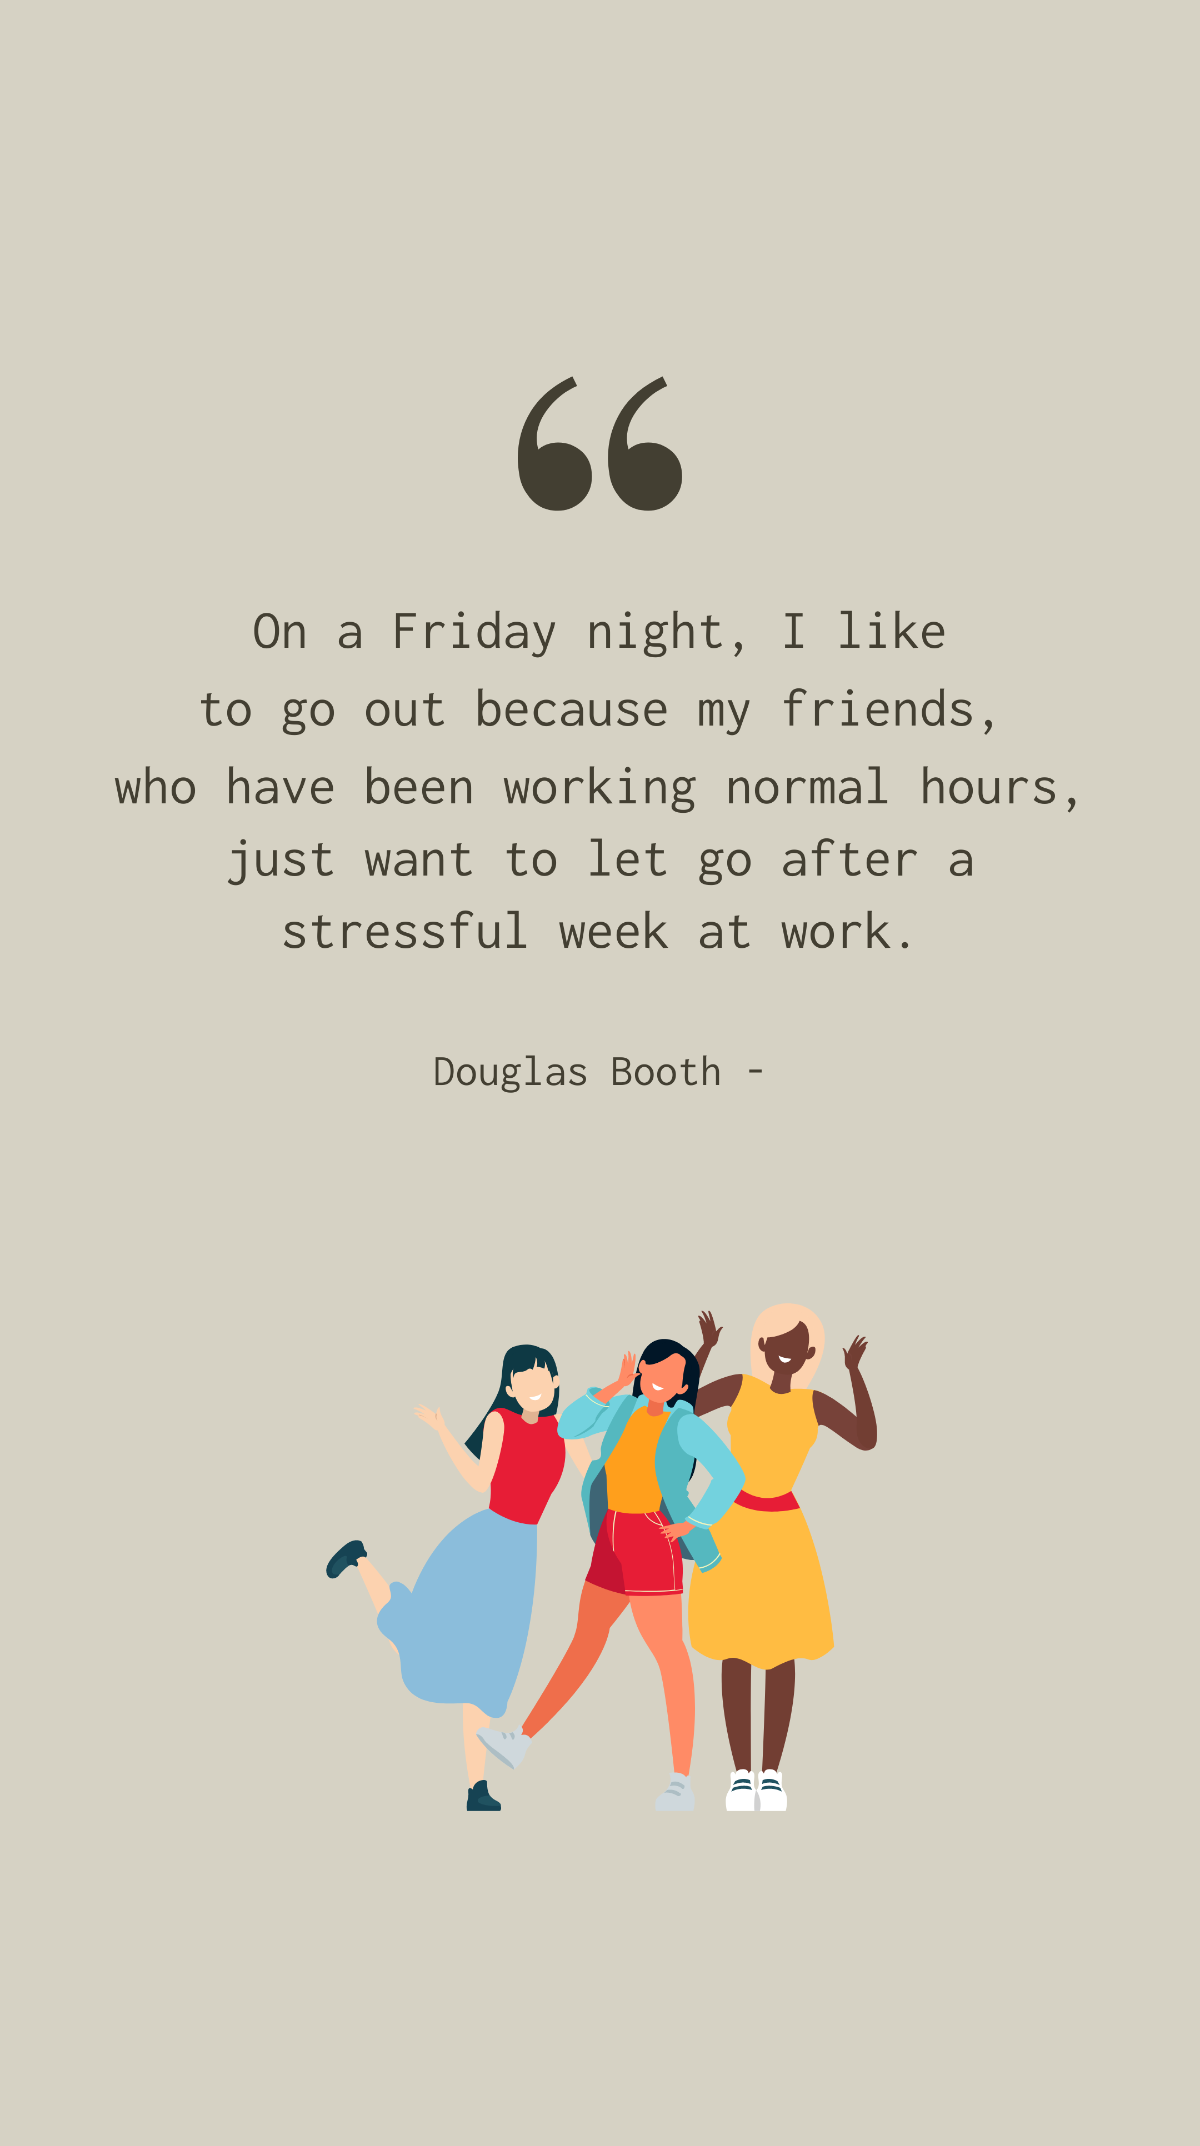 Douglas Booth - On a Friday night, I like to go out because my friends, who have been working normal hours, just want to let go after a stressful week at work. Template